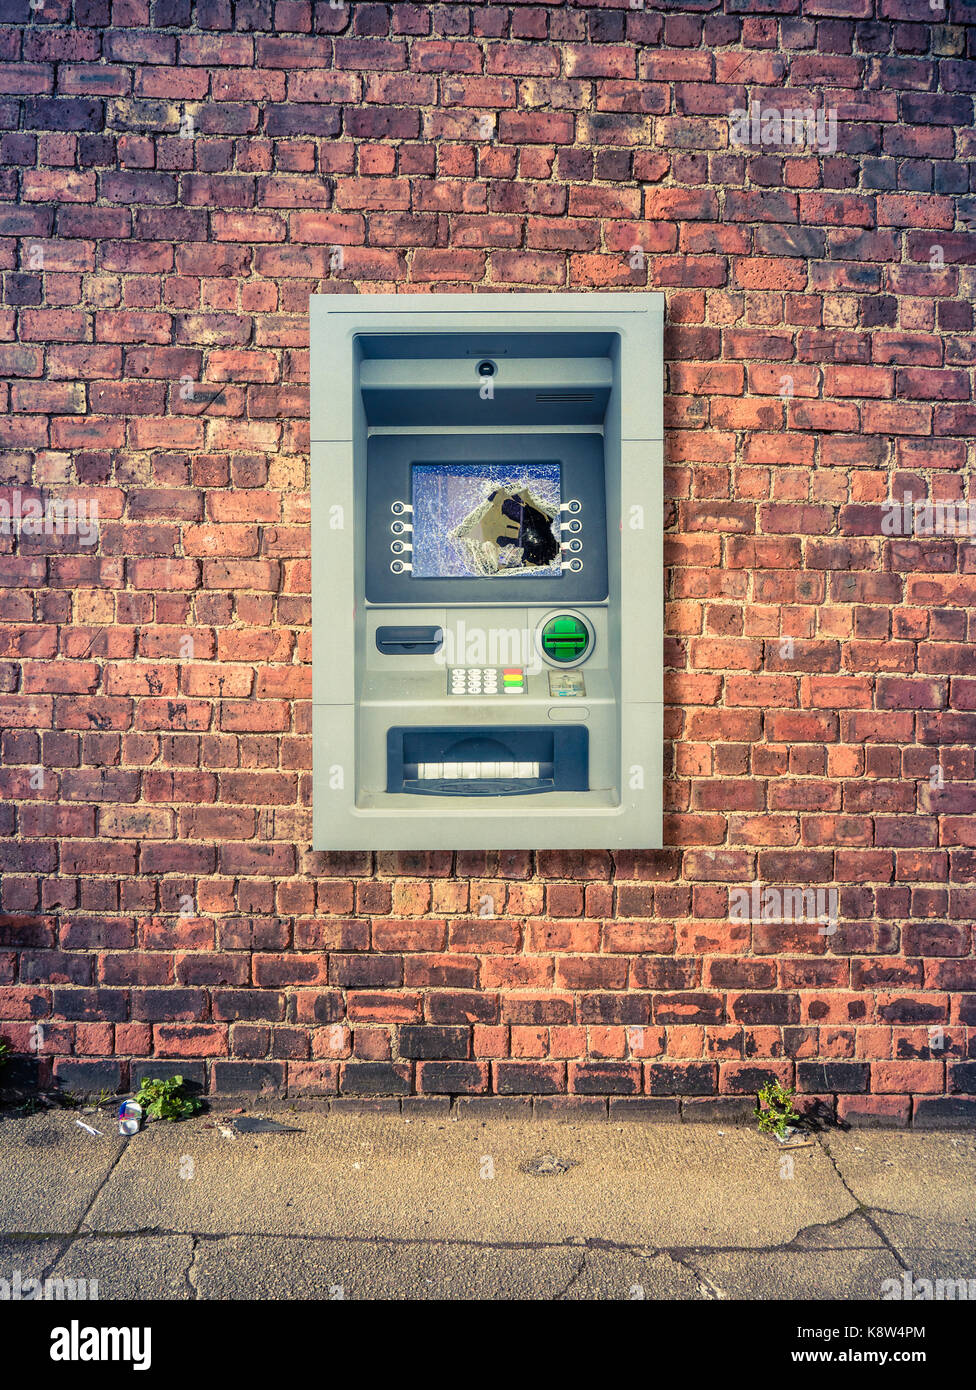 A Vandalized ATM Against A Grungy Red Brick Wall Stock Photo